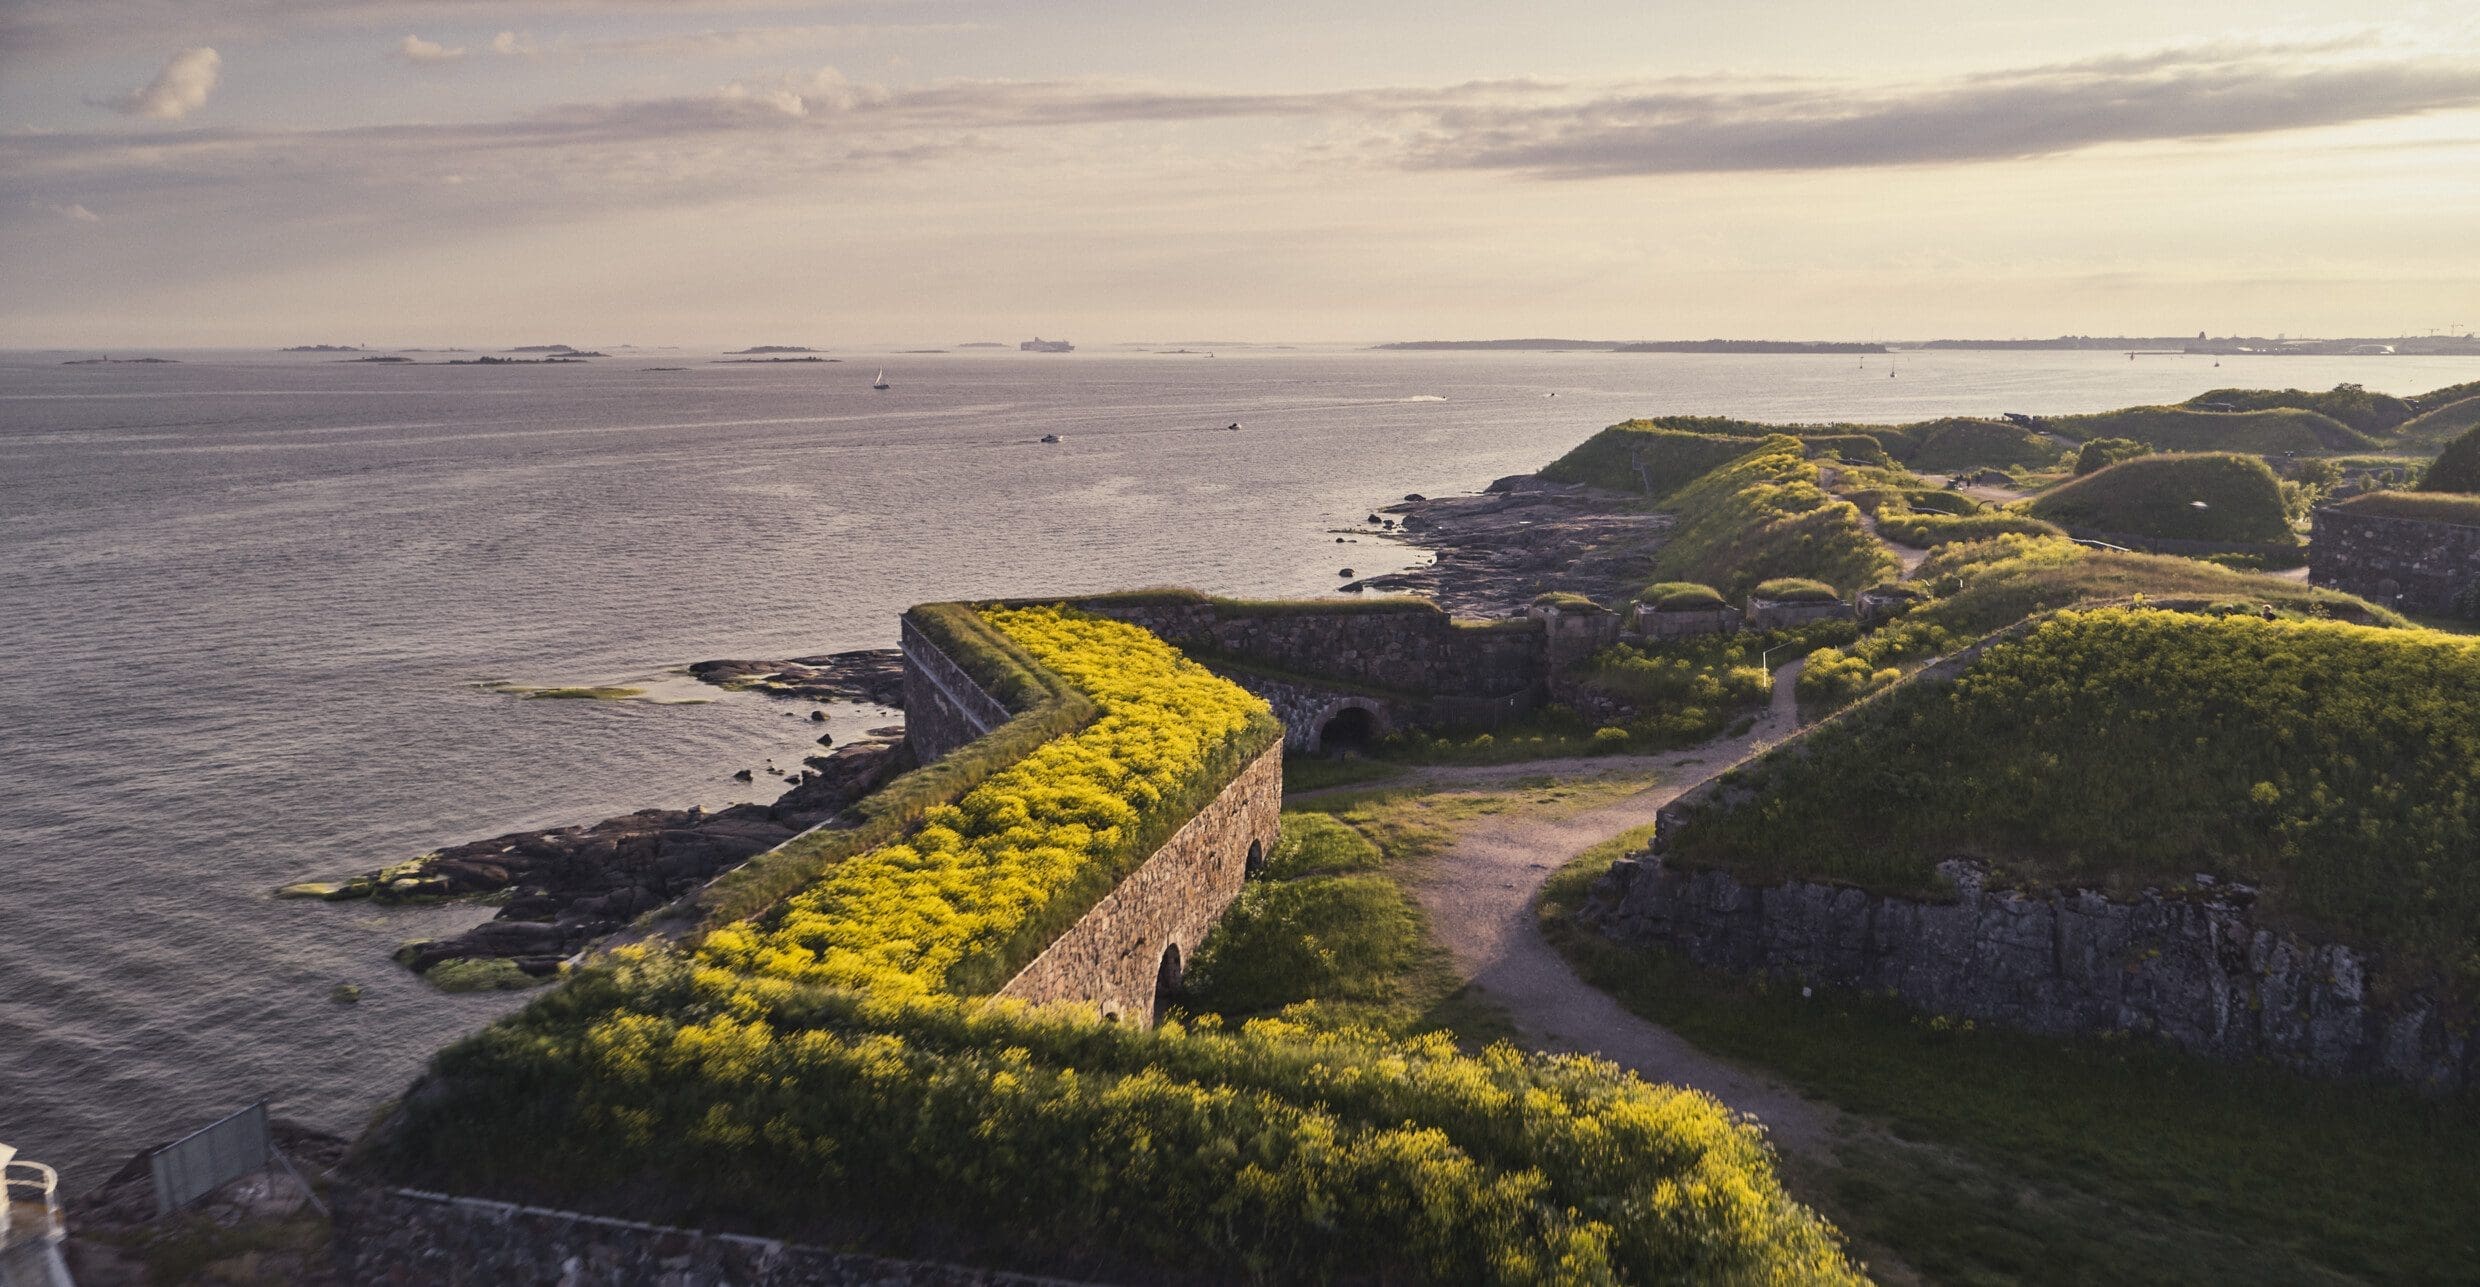 A view from above looking down on some of the star points of Suomenlinna's remaining fortress walls. The island is very green and in full bloom, the sea stretching to the horizon under a sunny blue sky.